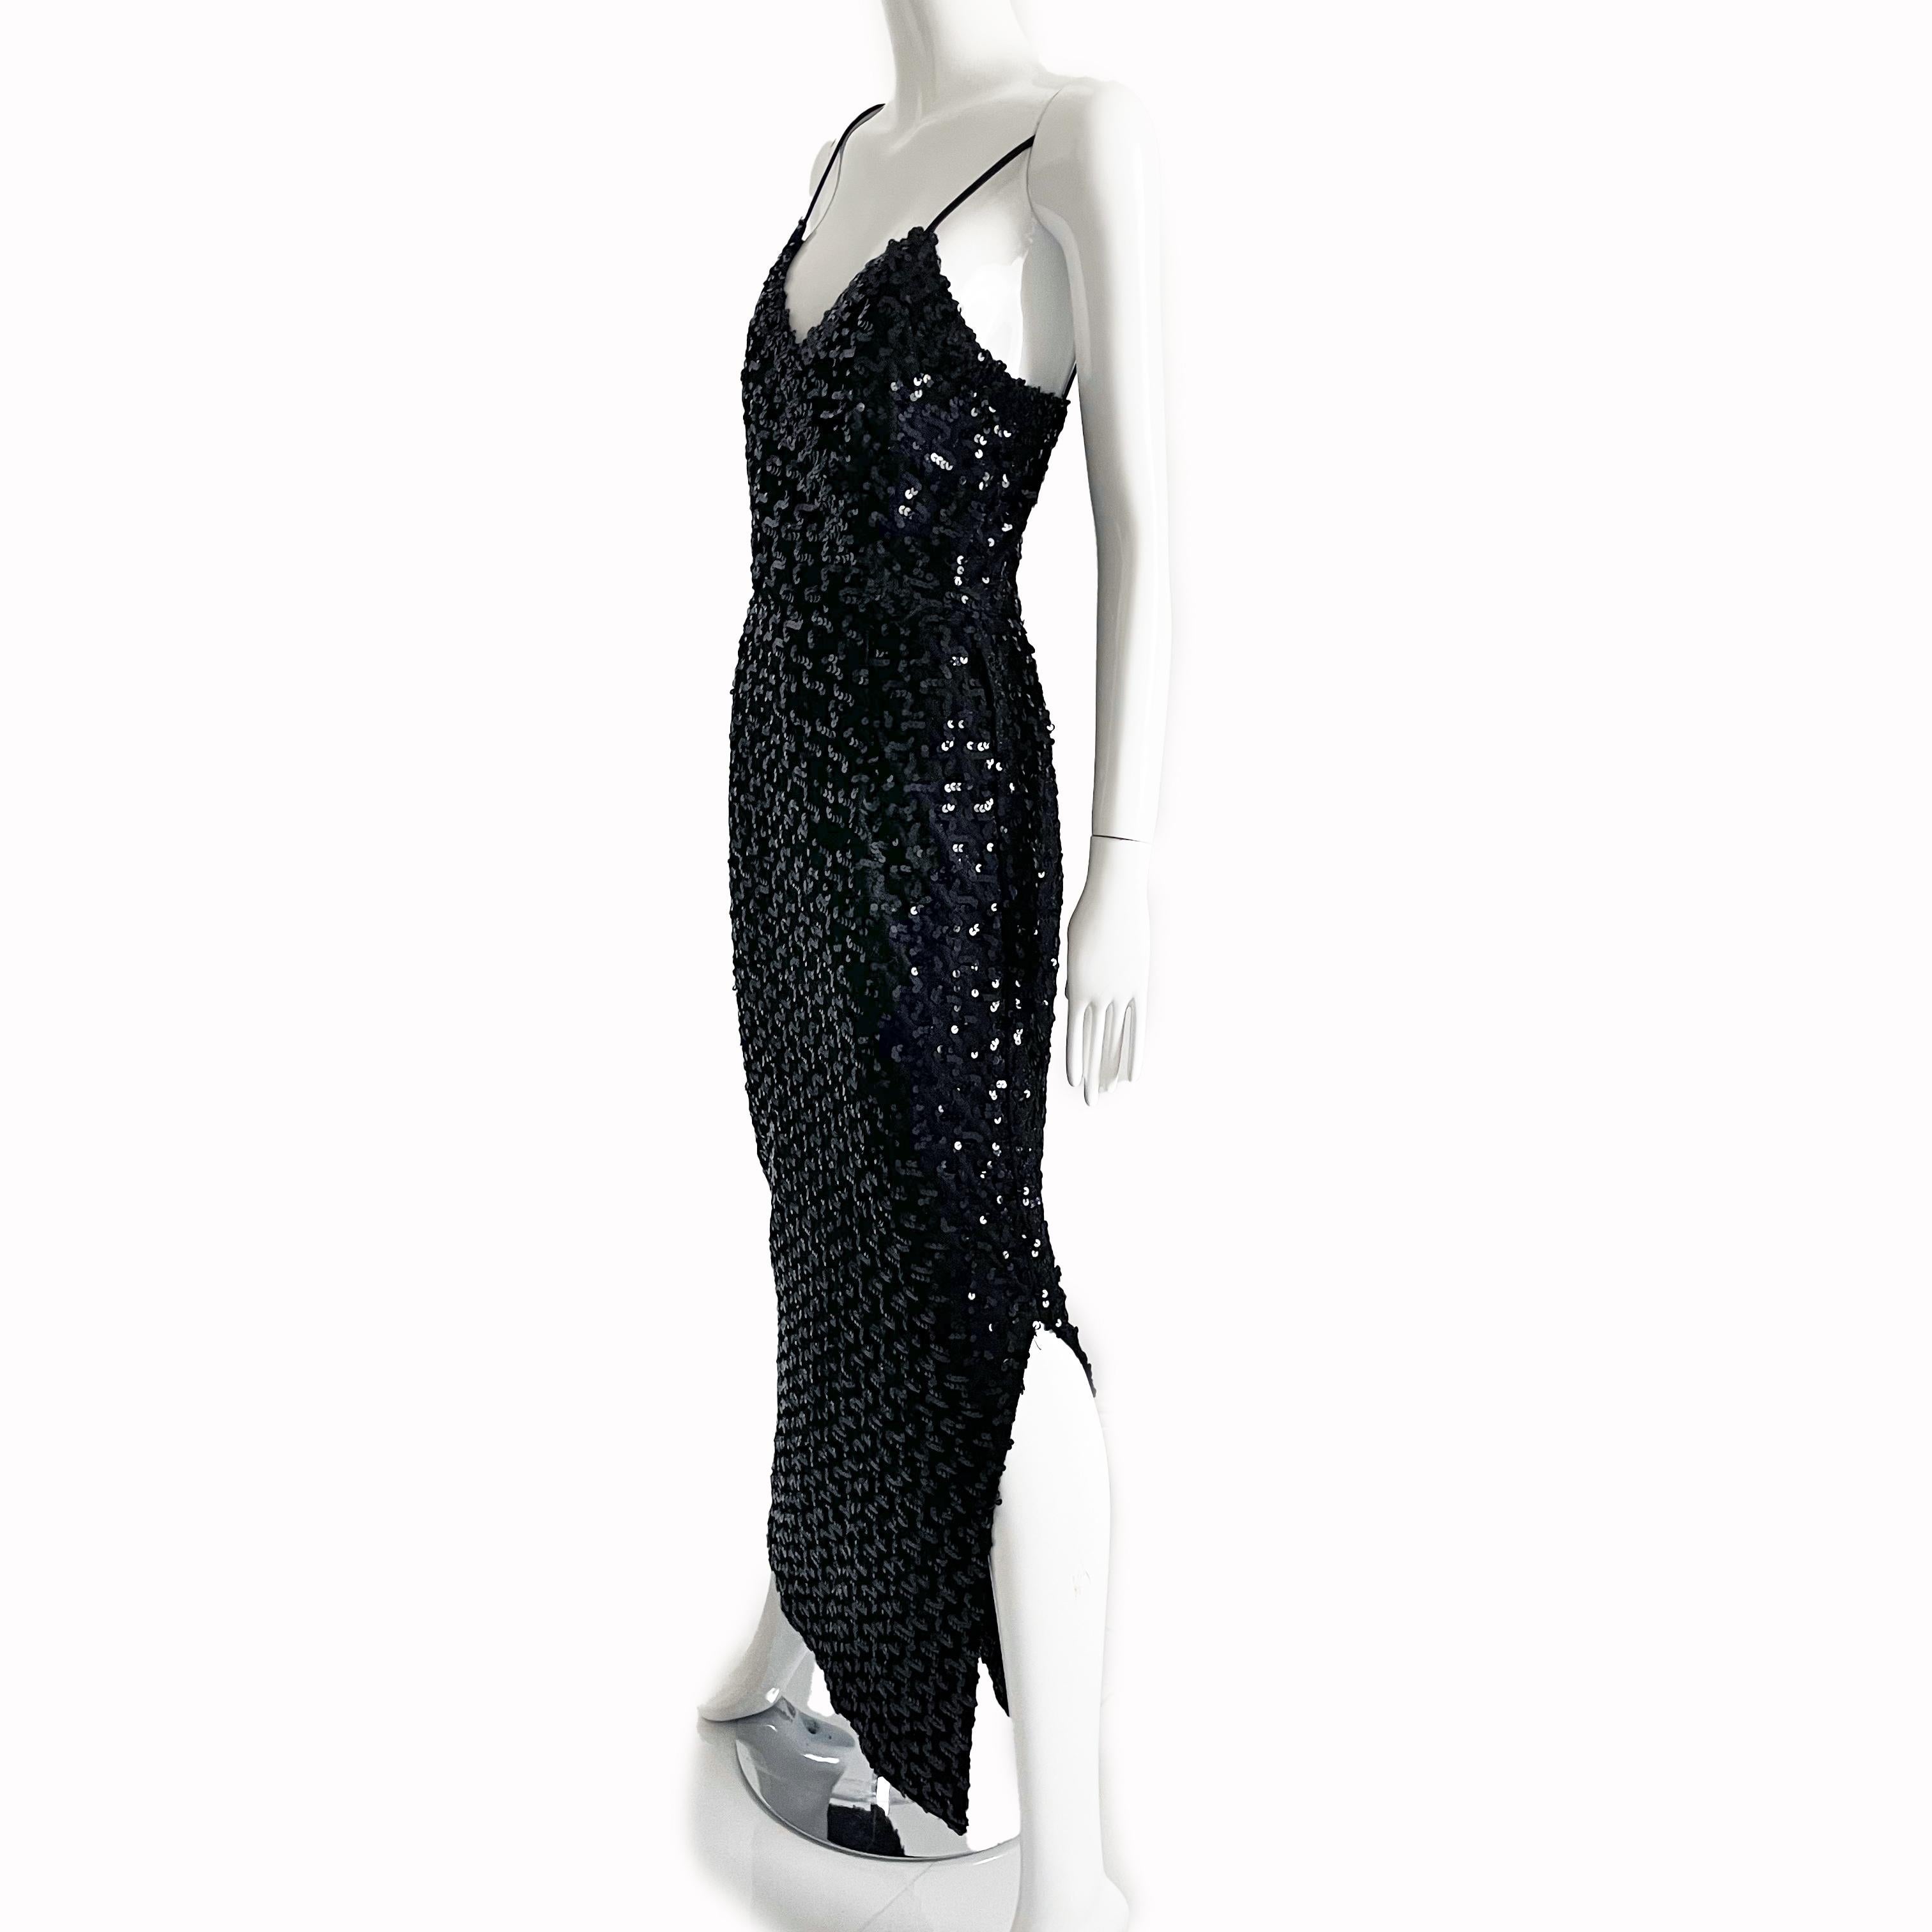 Lilli Diamond Evening Gown Sequins Sexy Black Knit Formal Dress Vintage 70s 2